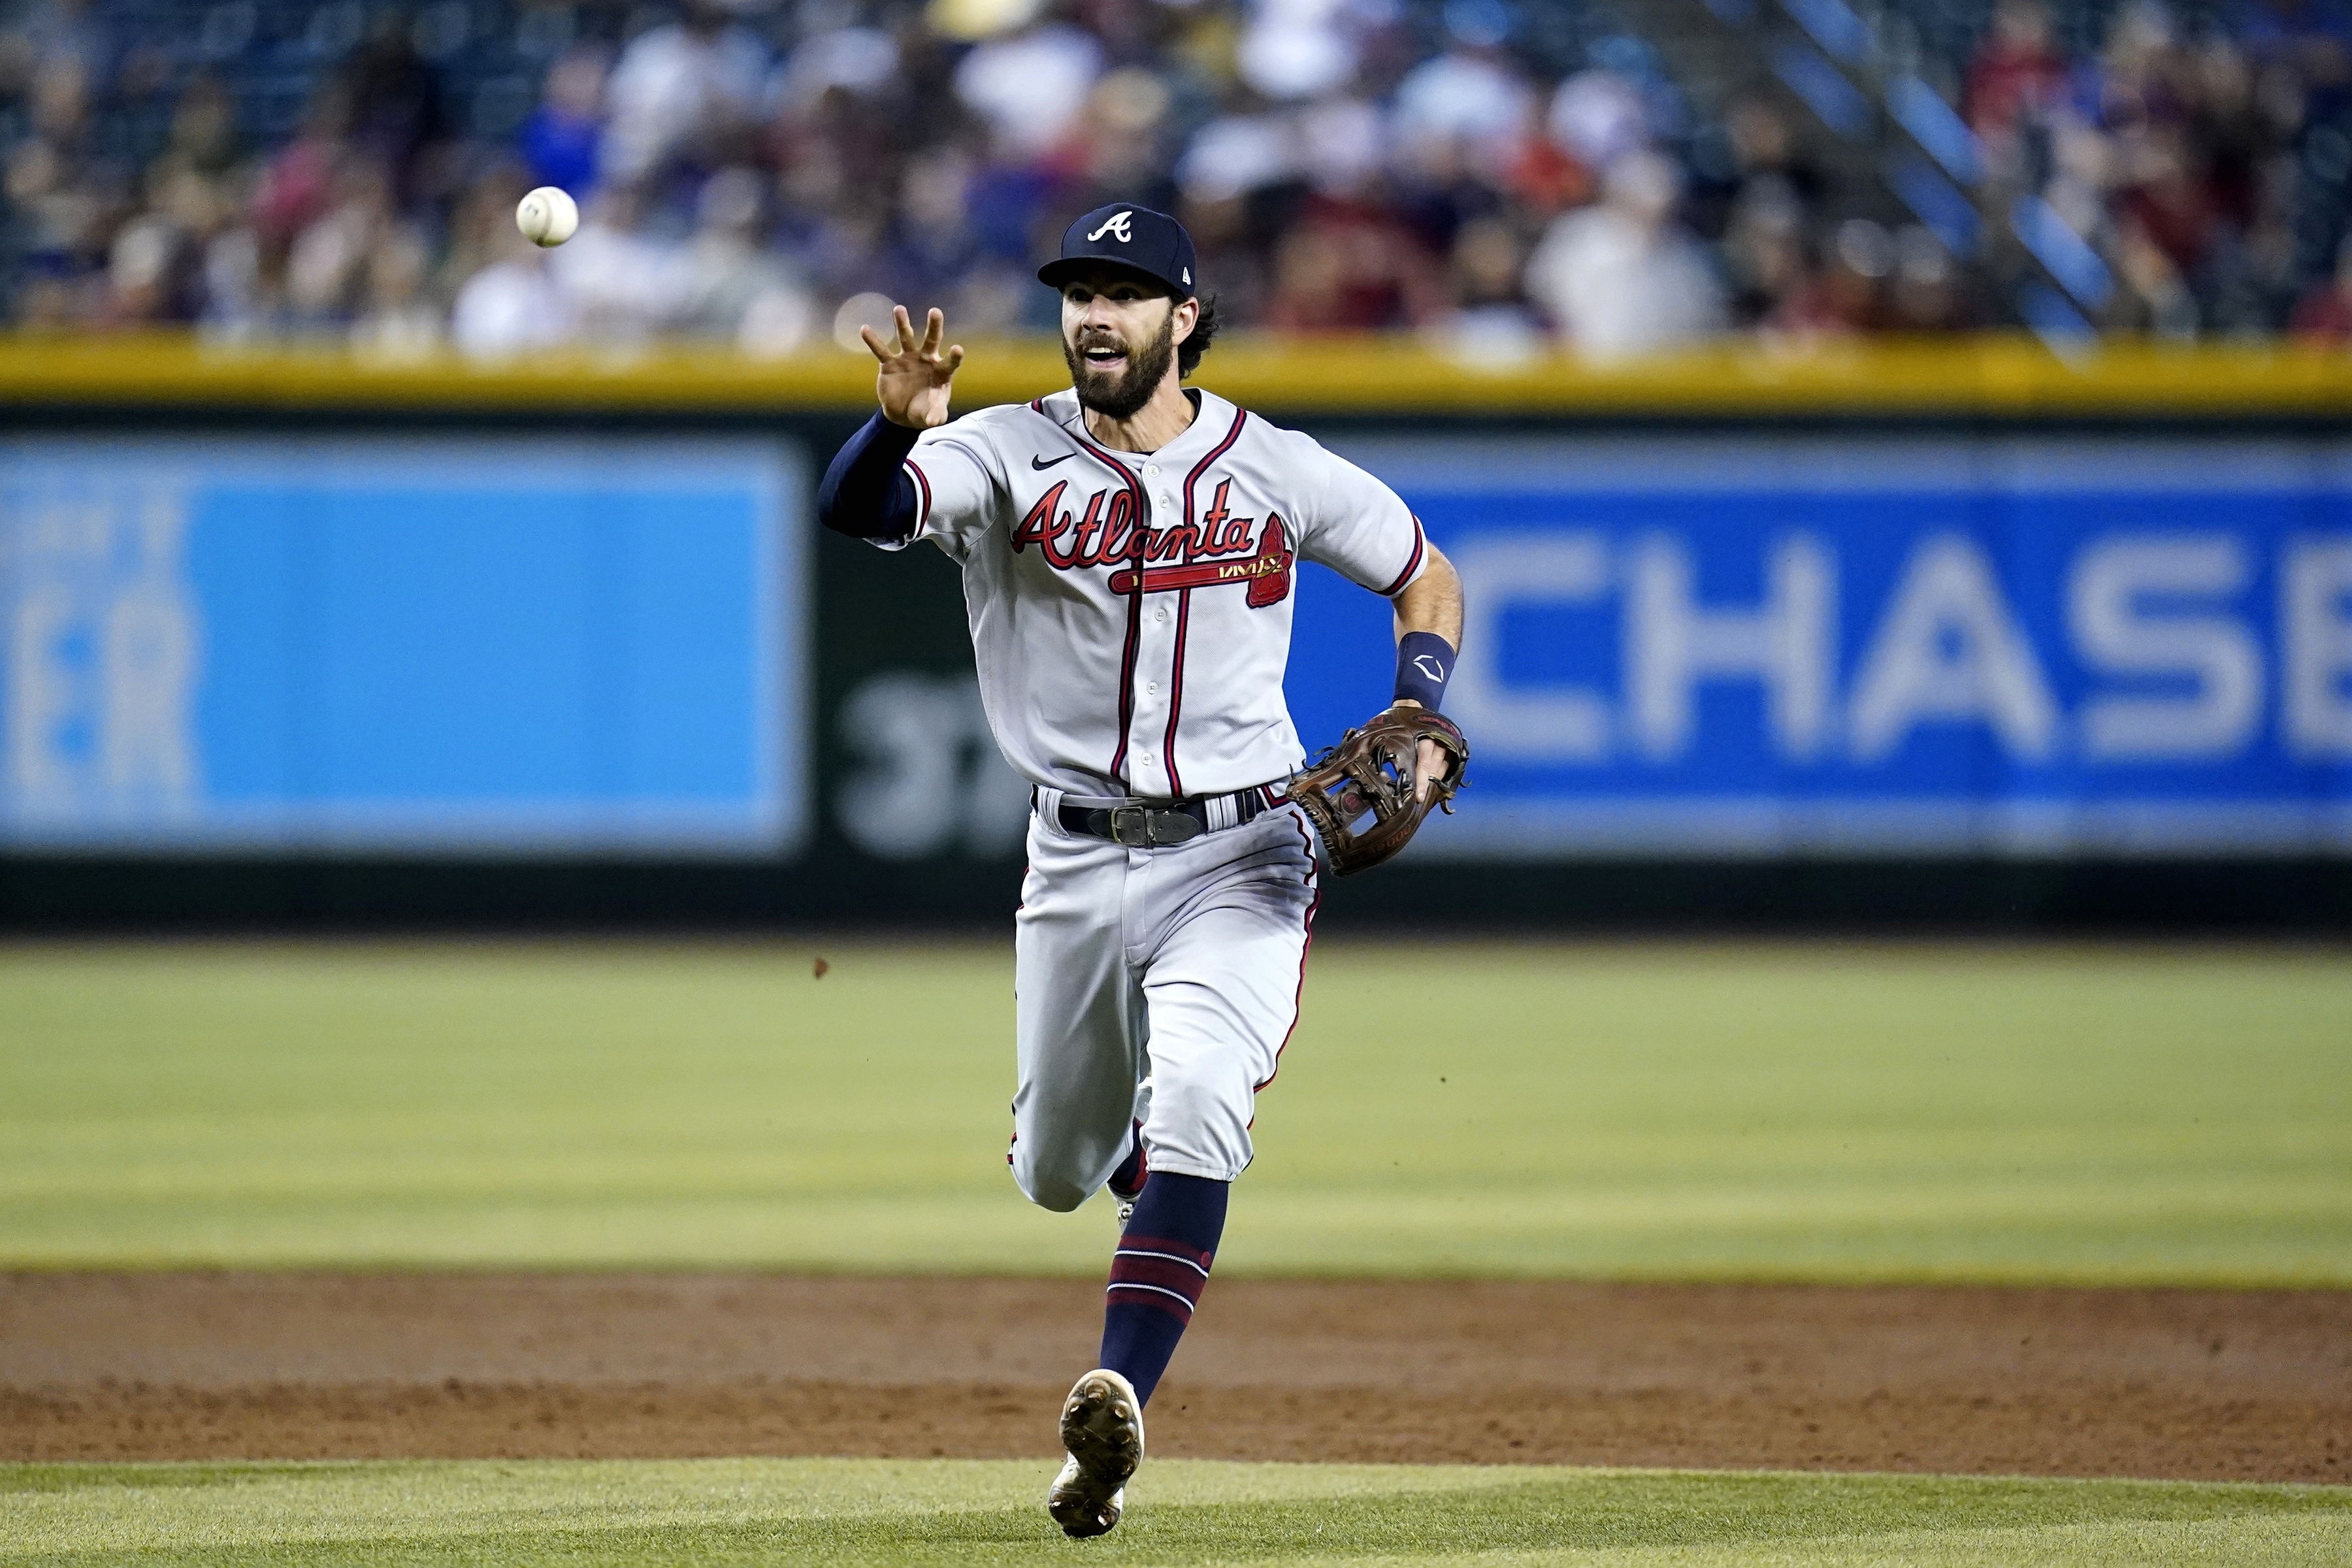 Phillies shortstop search: Dansby Swanson is elite on defense and